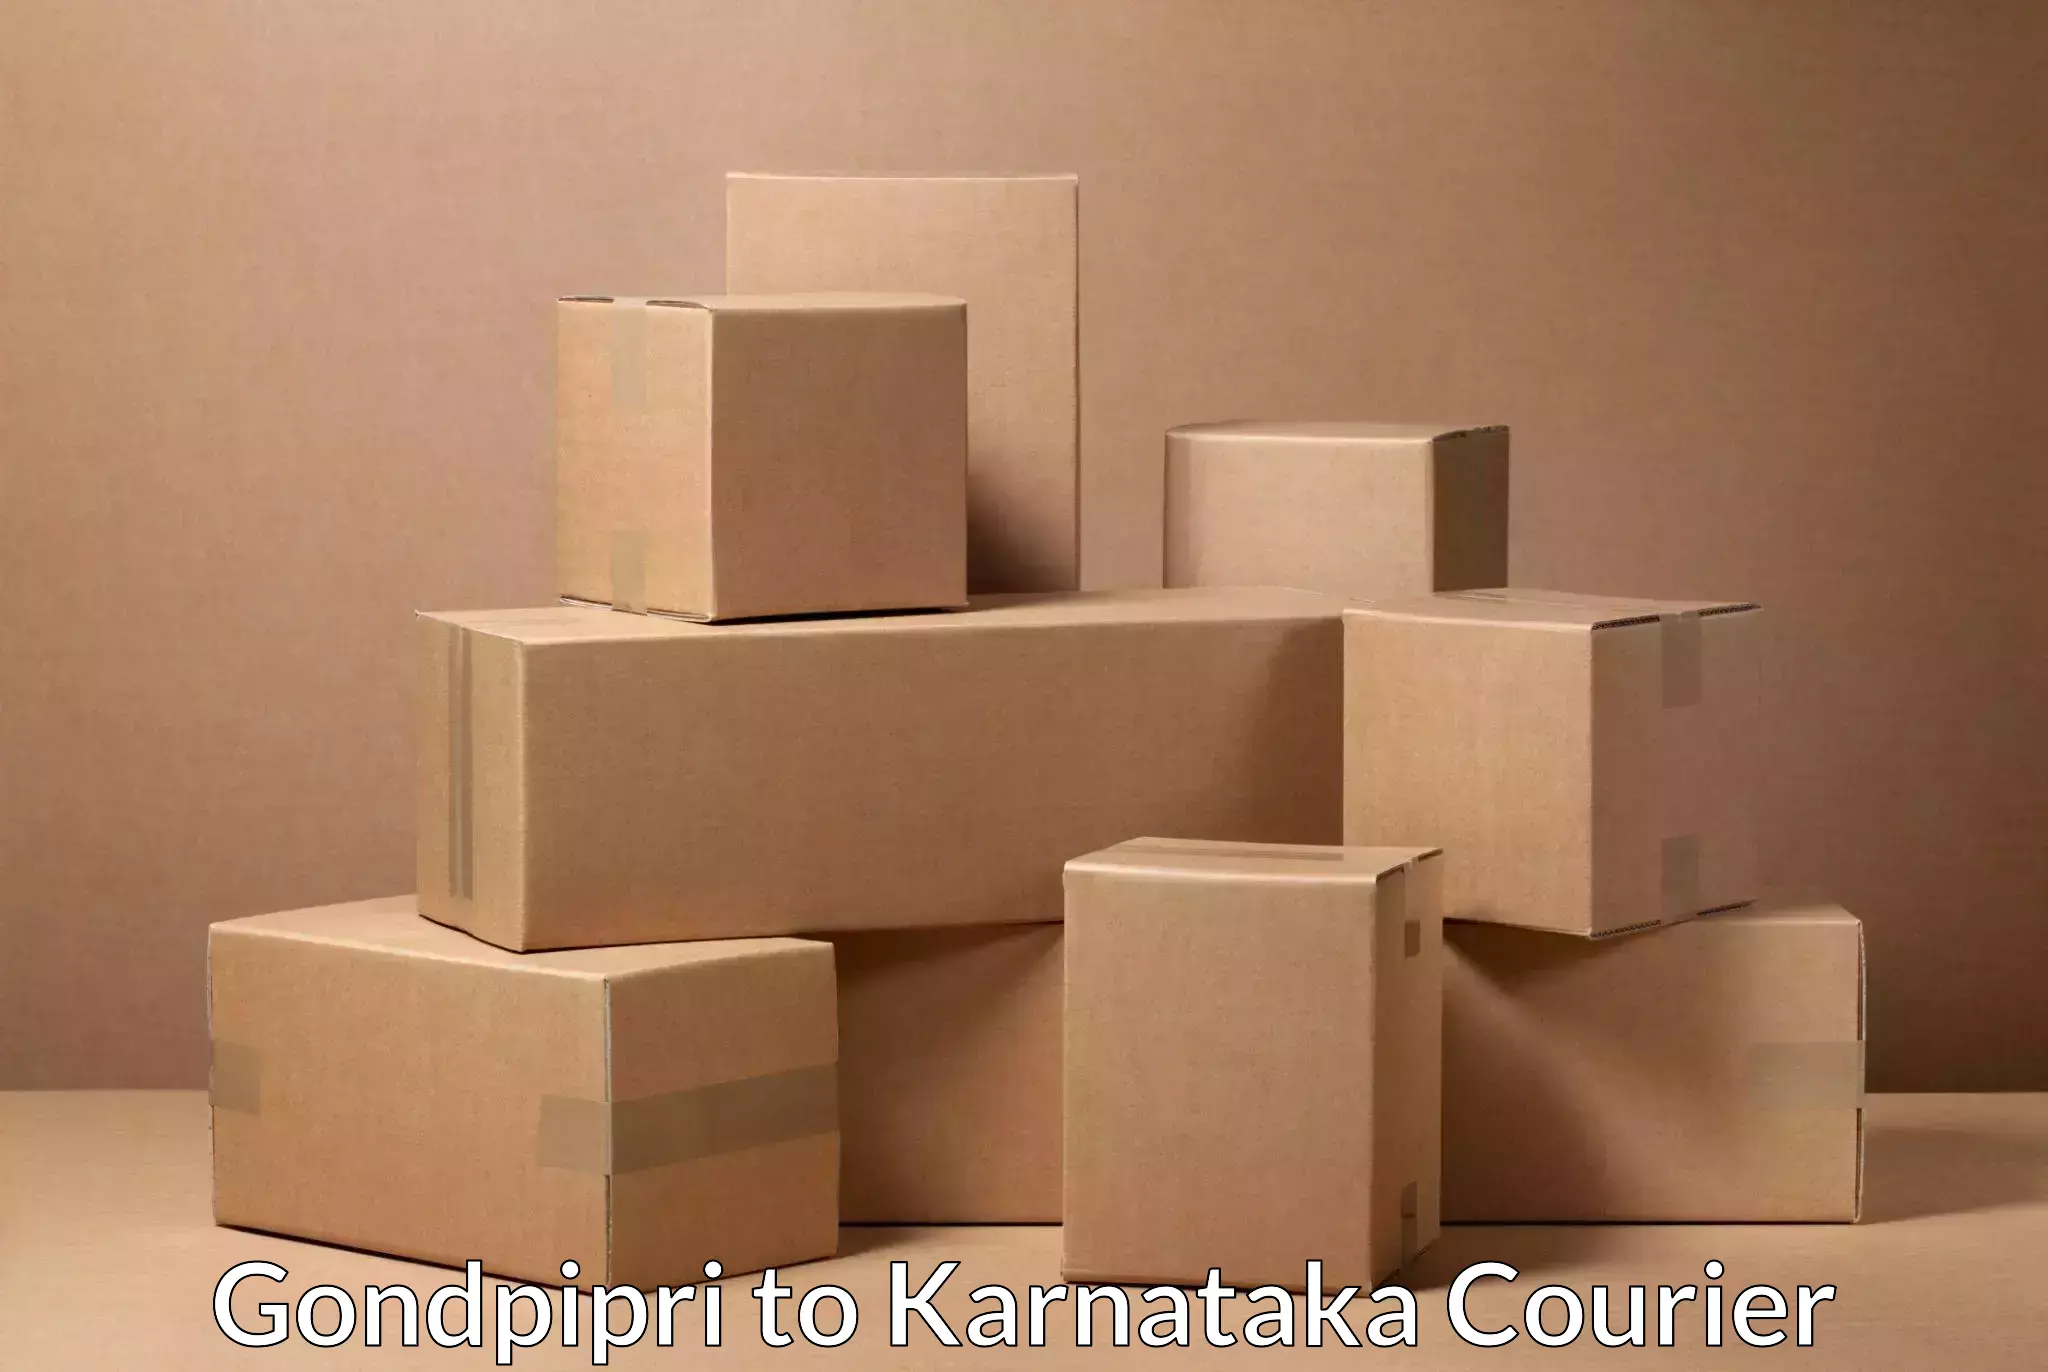 Residential courier service Gondpipri to Manipal